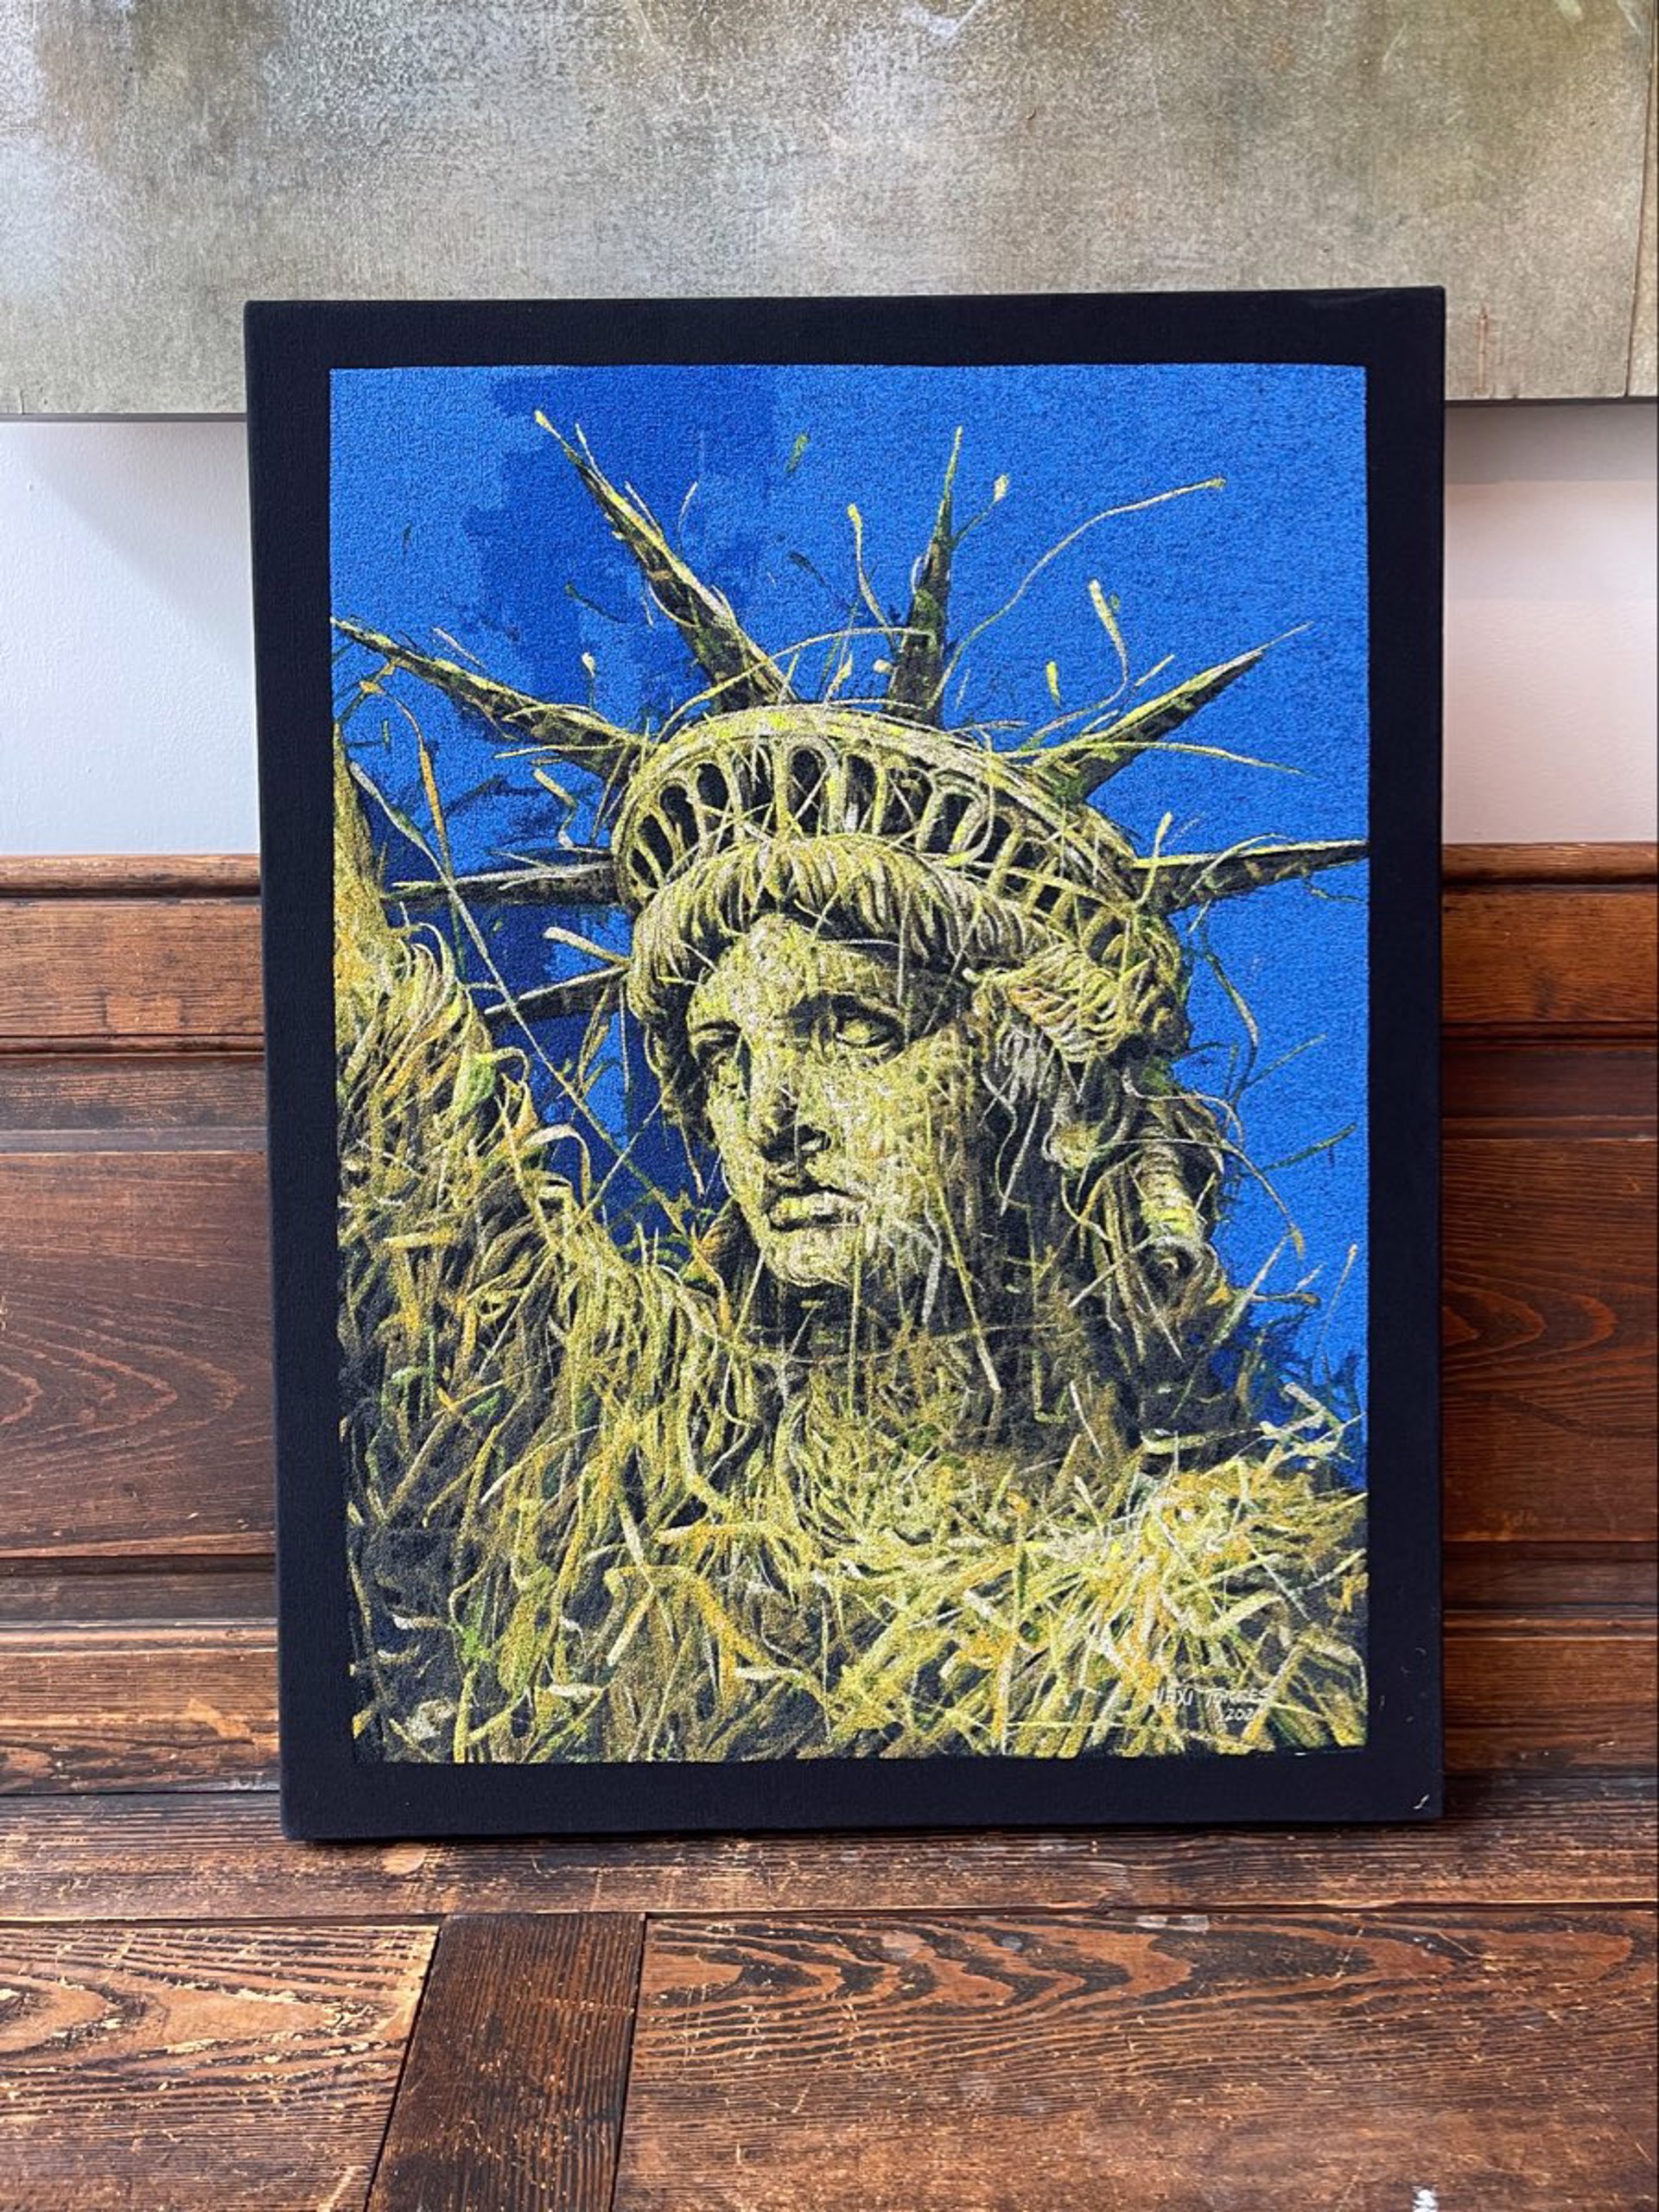 Liberty by Alexi Torres